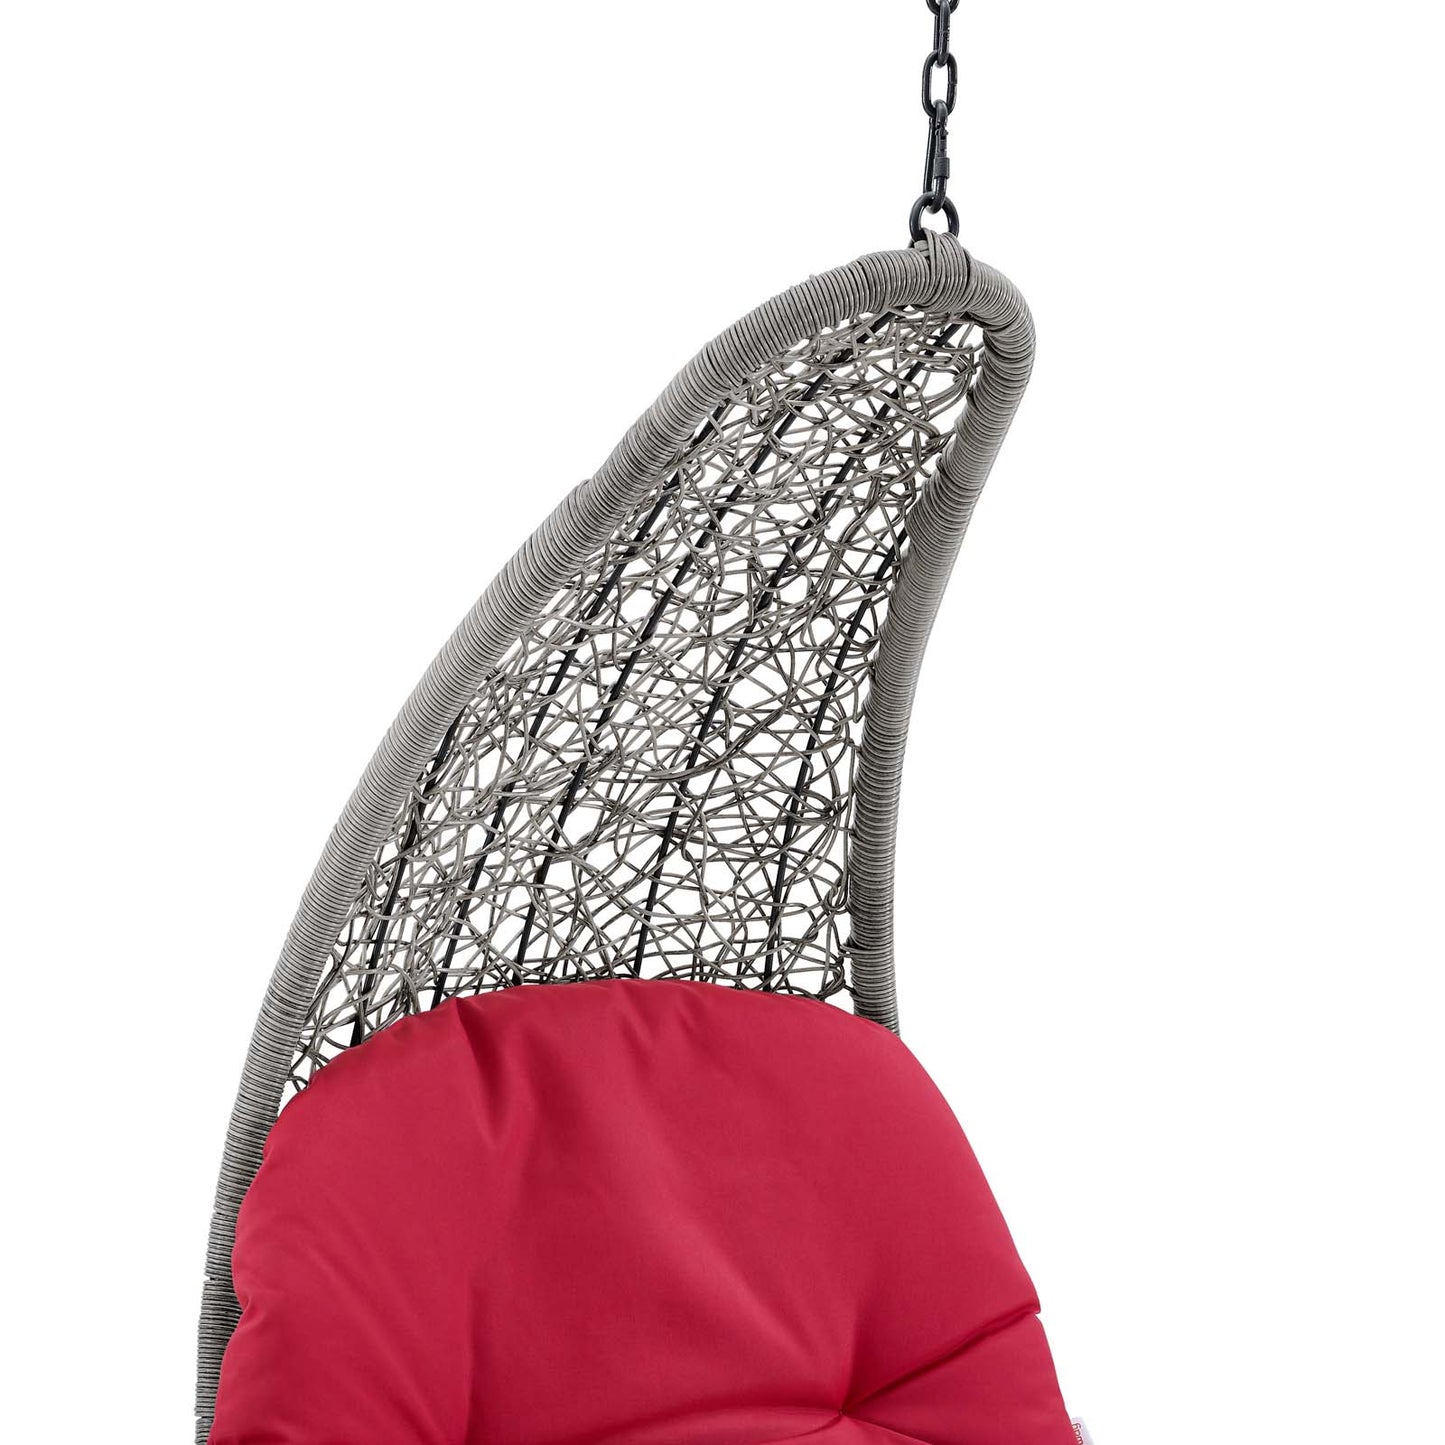 Landscape Hanging Chaise Lounge Outdoor Patio Swing Chair Light Gray Red EEI-4589-LGR-RED